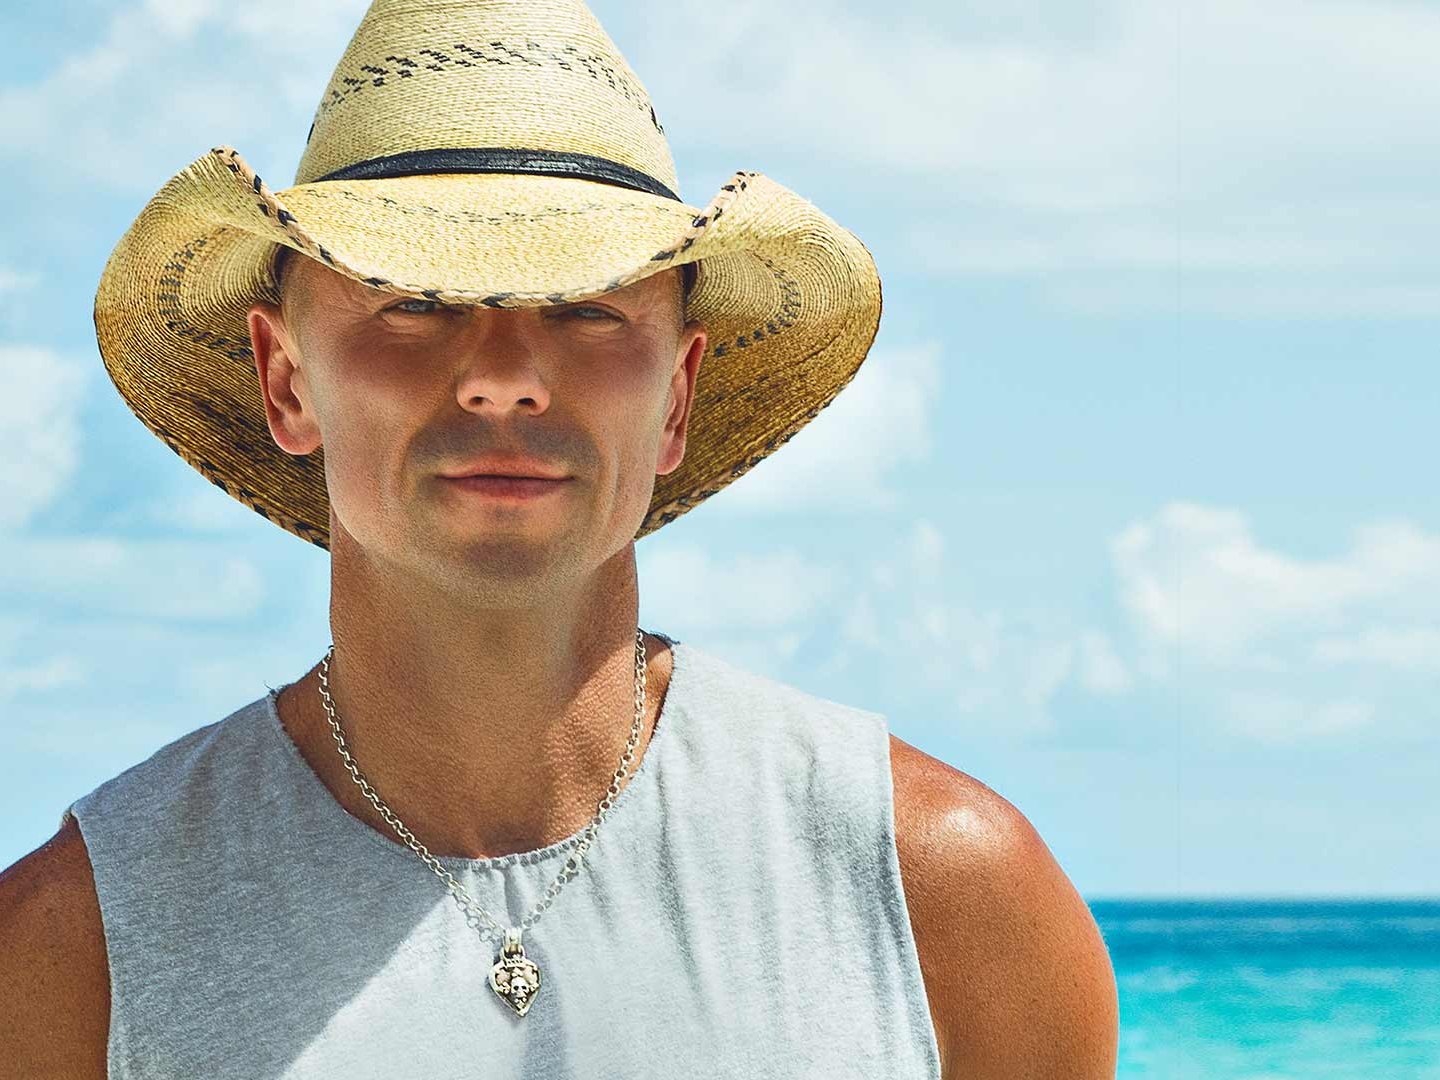 Kenny Chesney News, Articles, Stories & Trends for Today